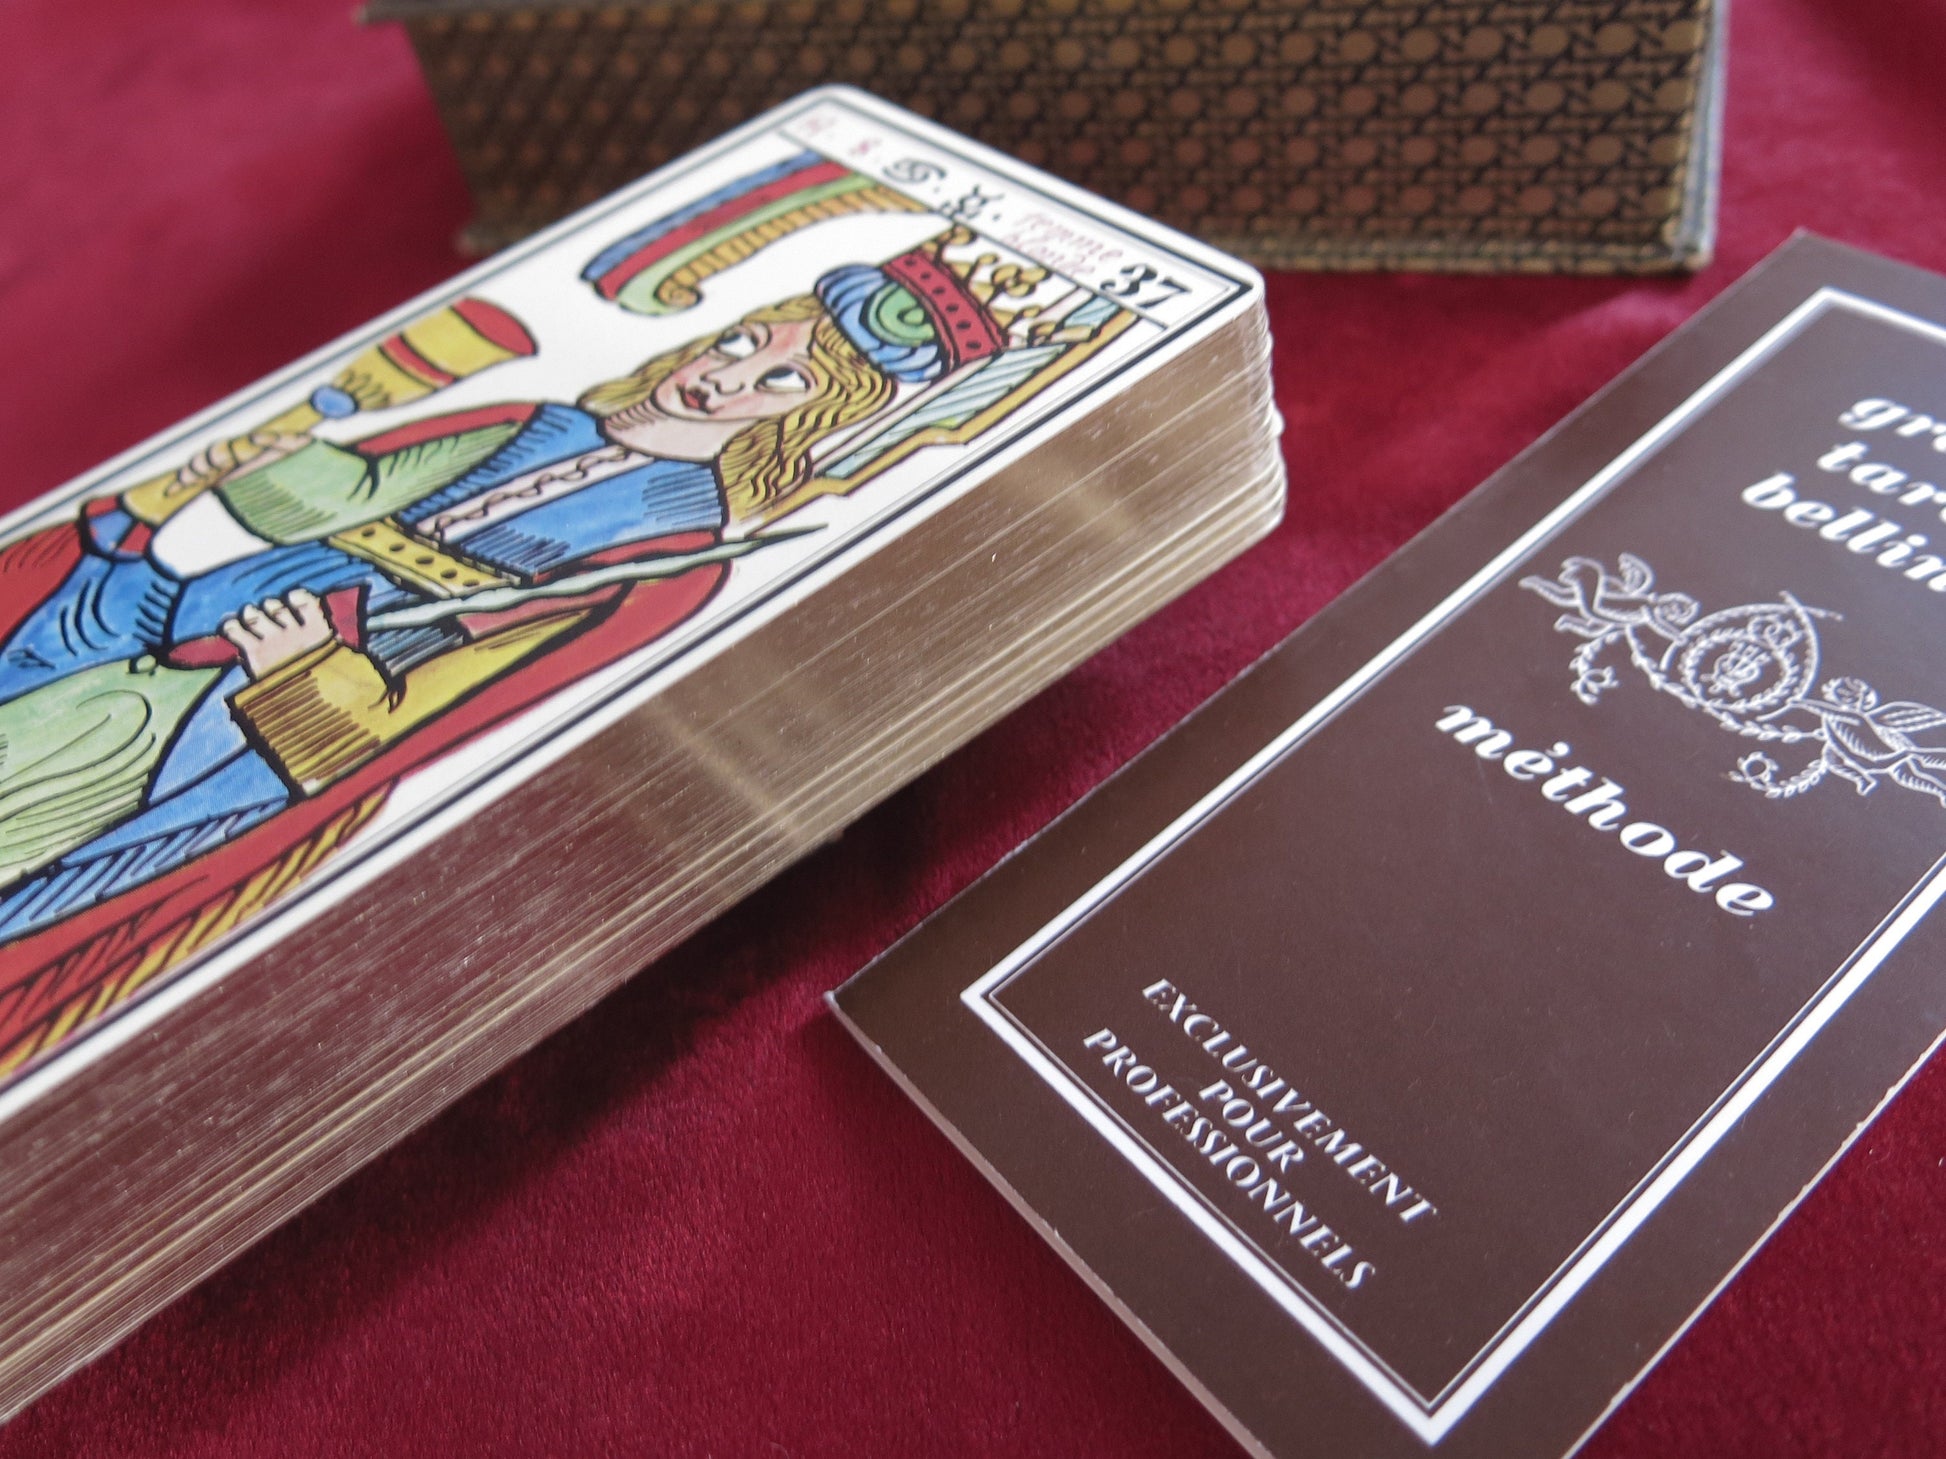 Le Grand Tarot Belline — The World of Playing Cards